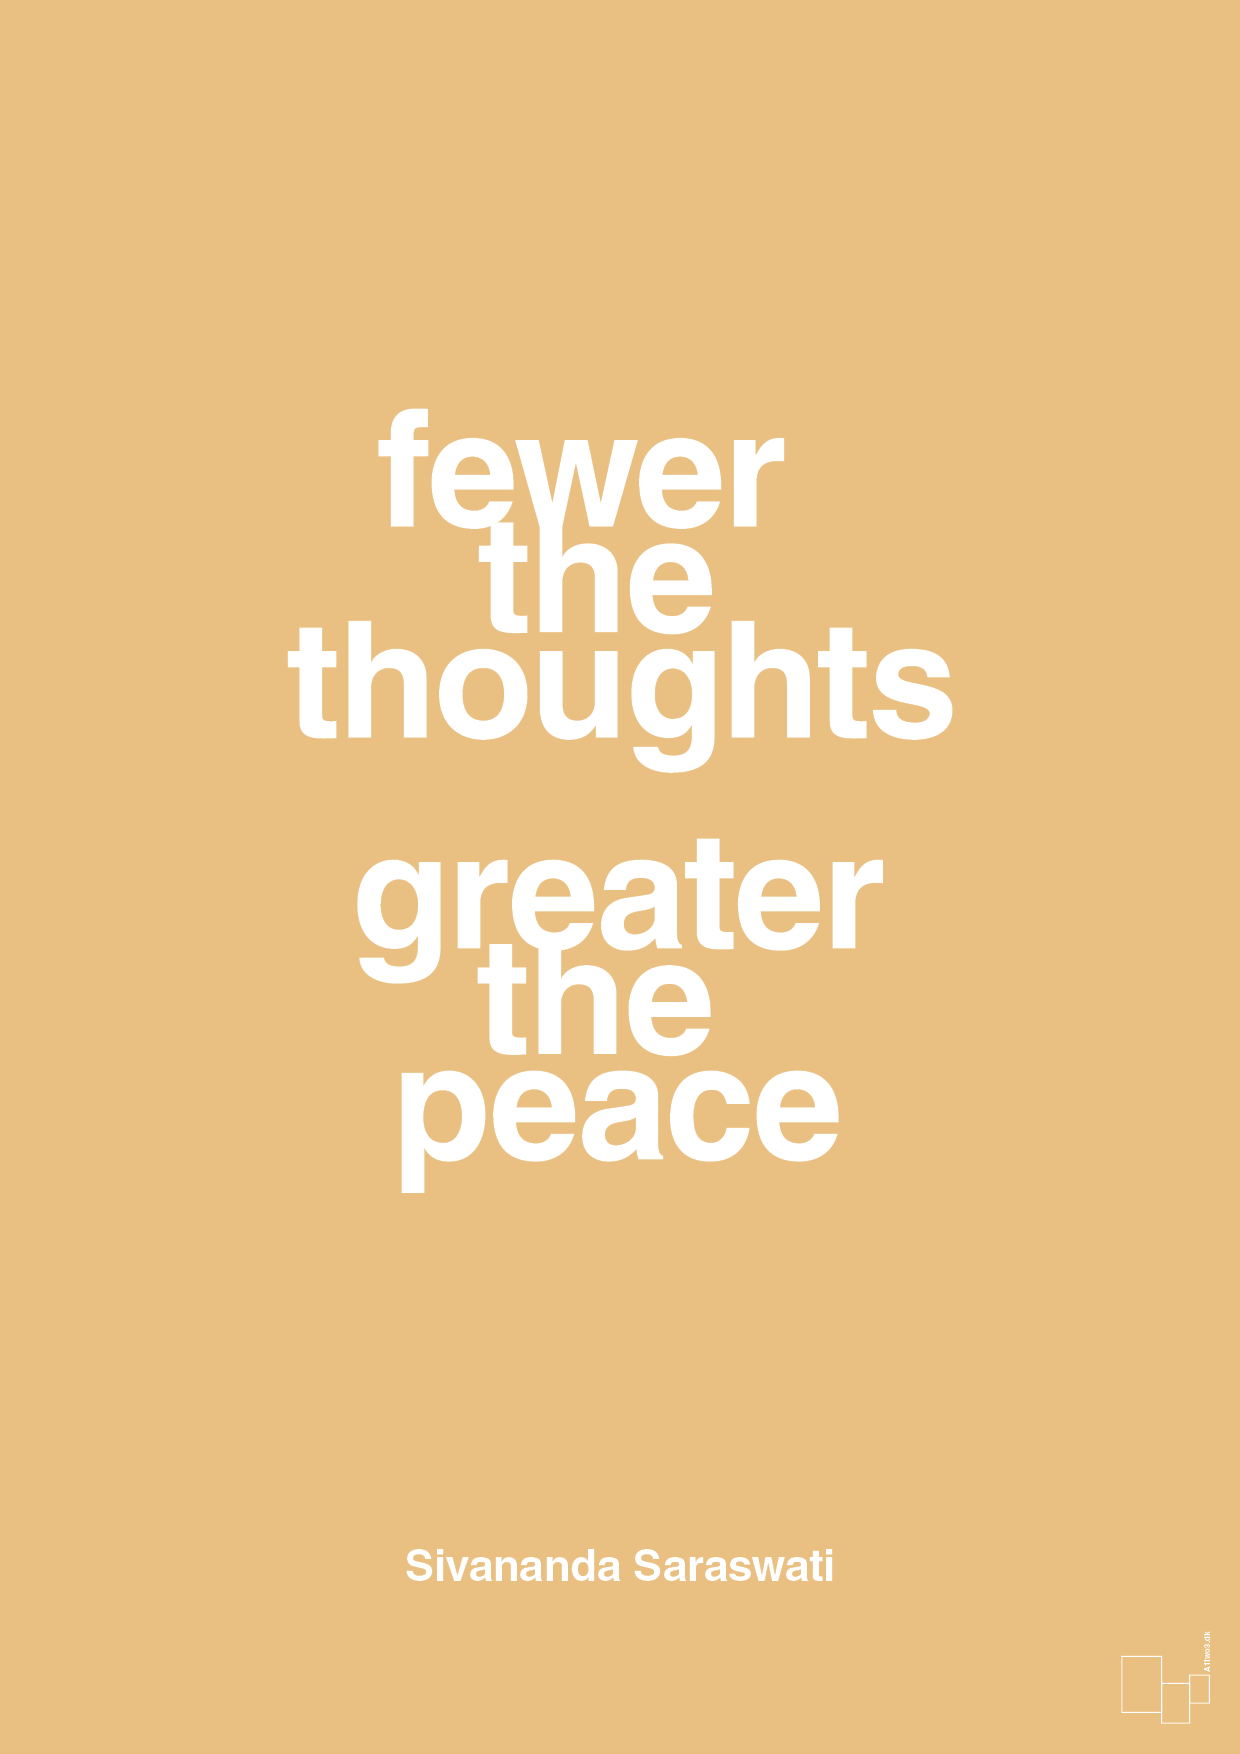 fewer the thoughts greater the peace - Plakat med Citater i Charismatic